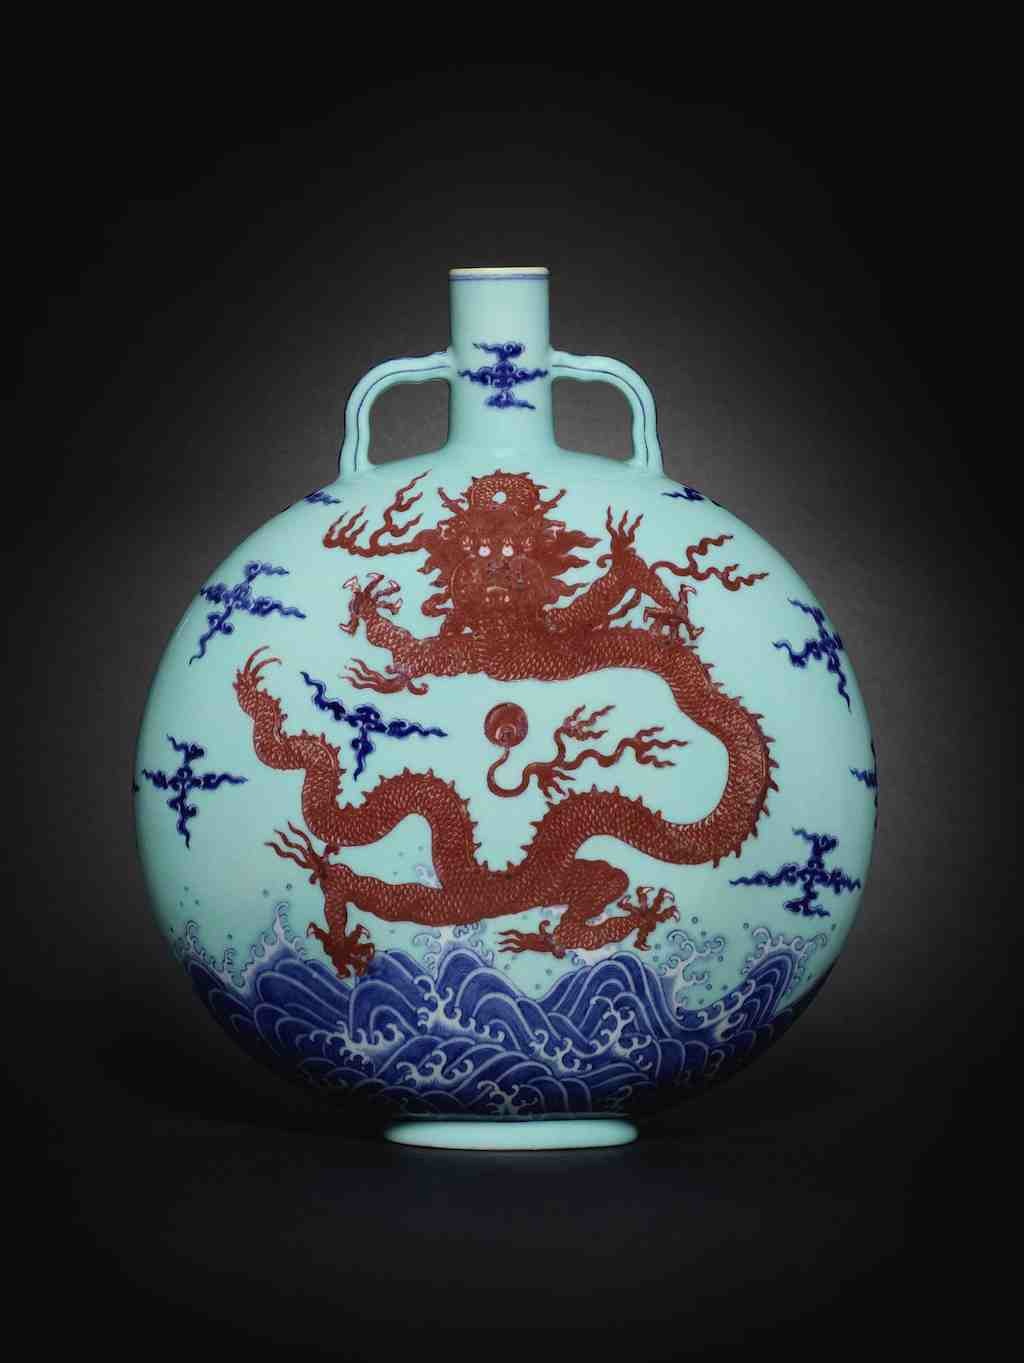 Qianlong flask set to return home after record sale